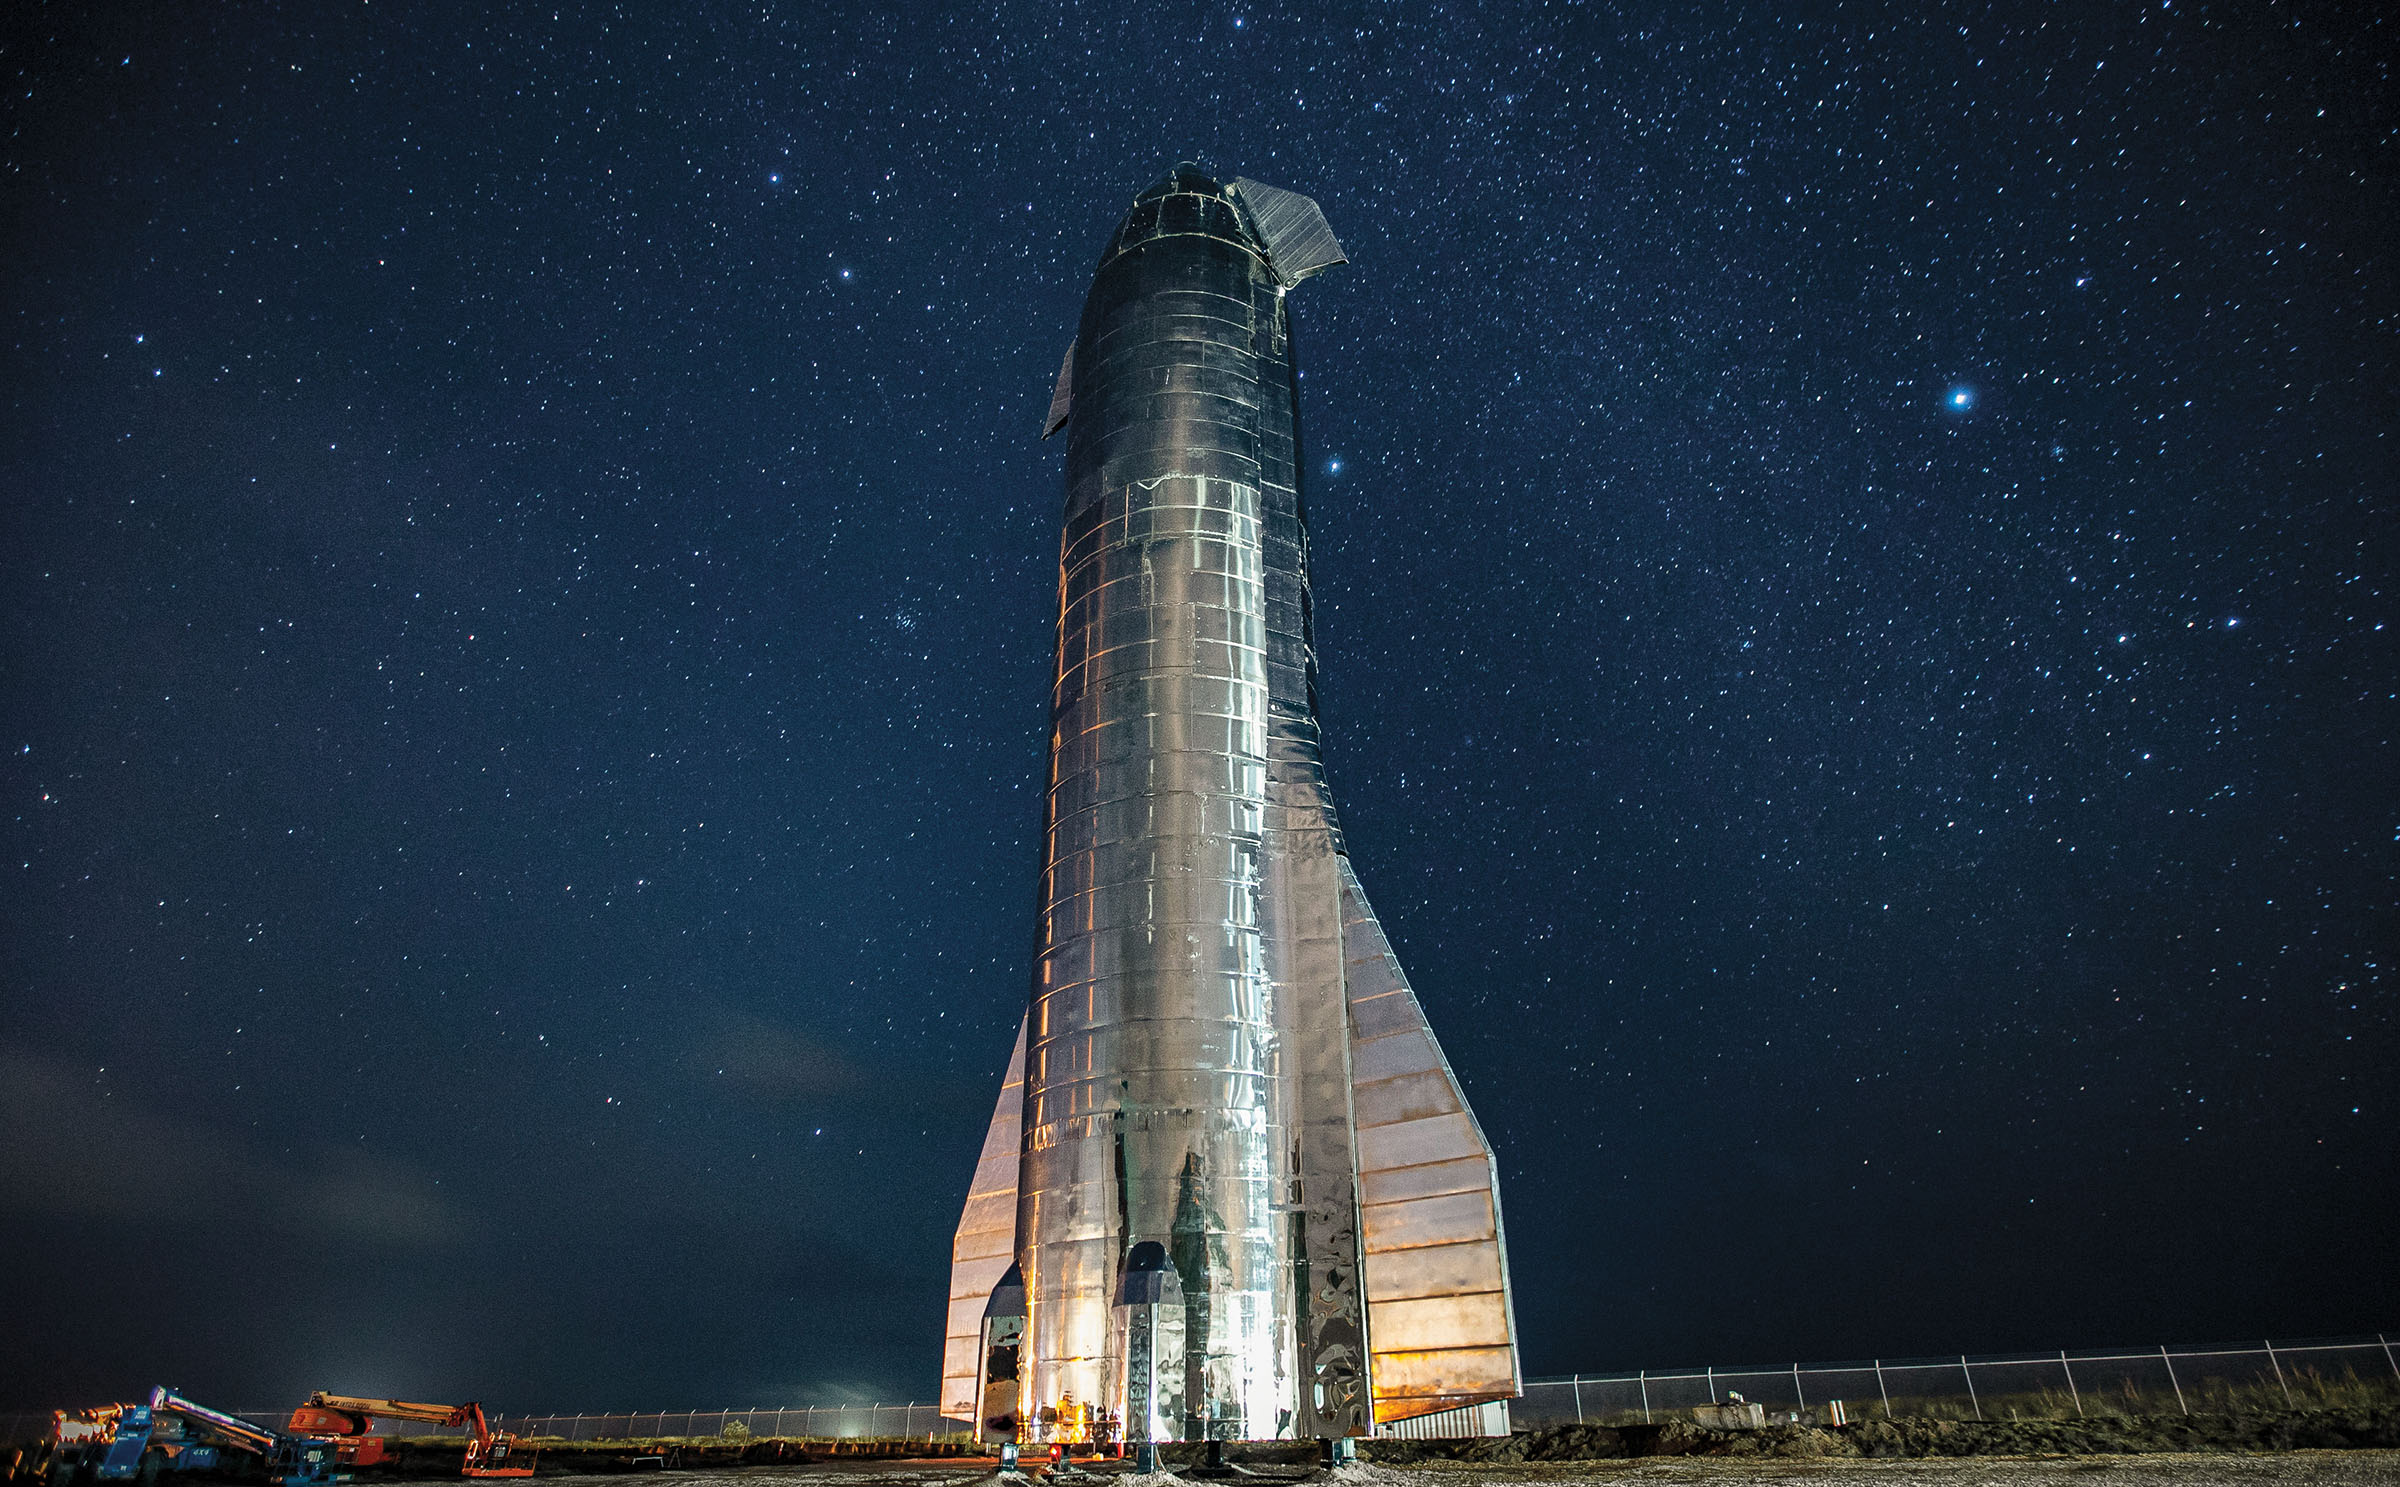 A bright silver rocket in front of a starry night sky